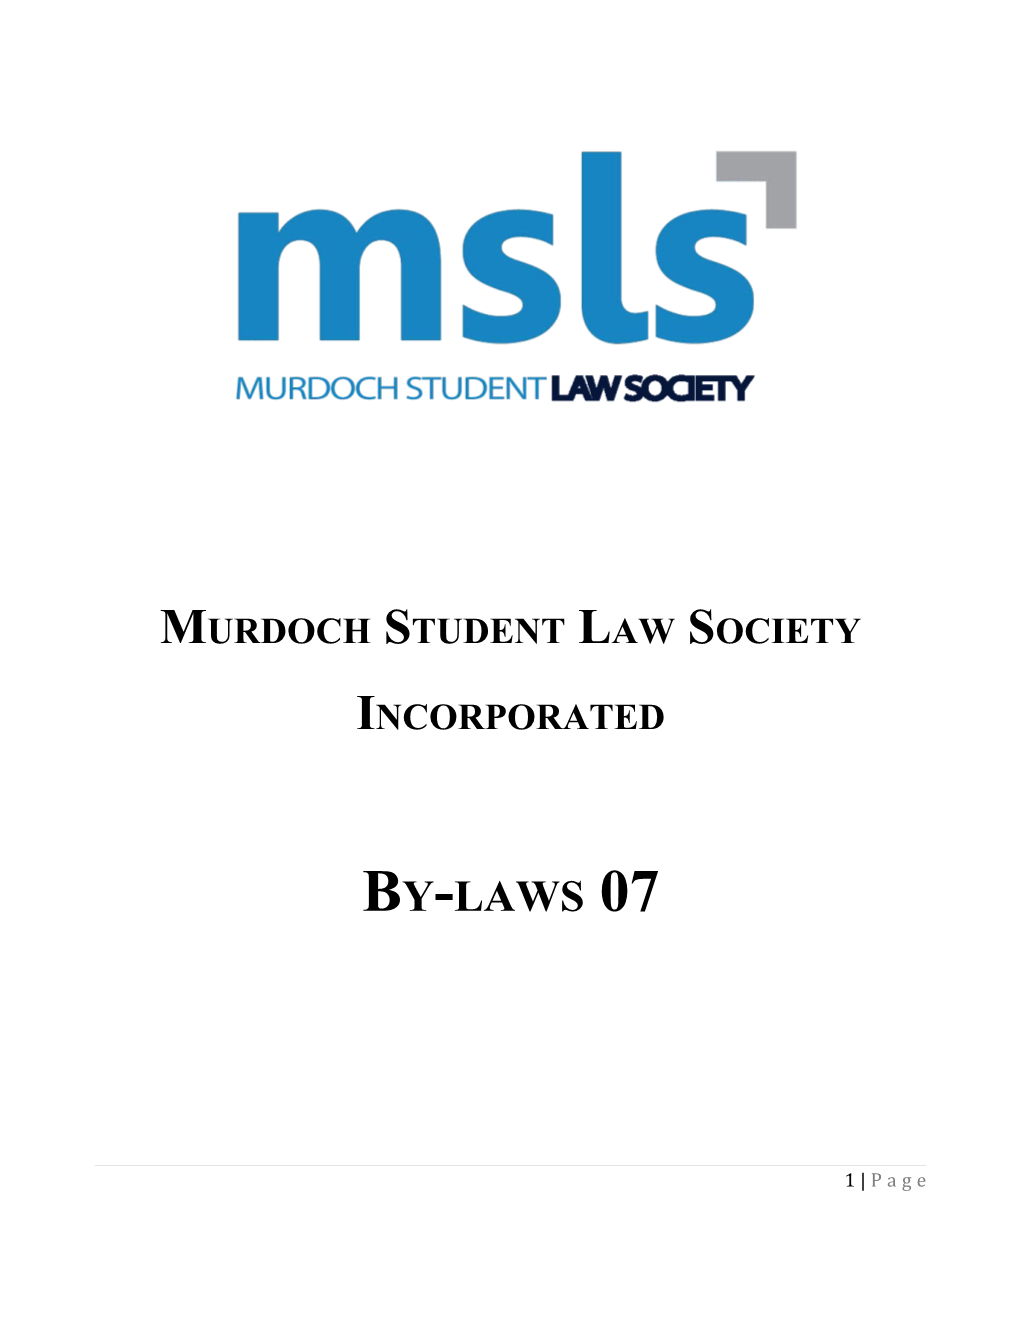 Murdoch Student Law Society Incorporated